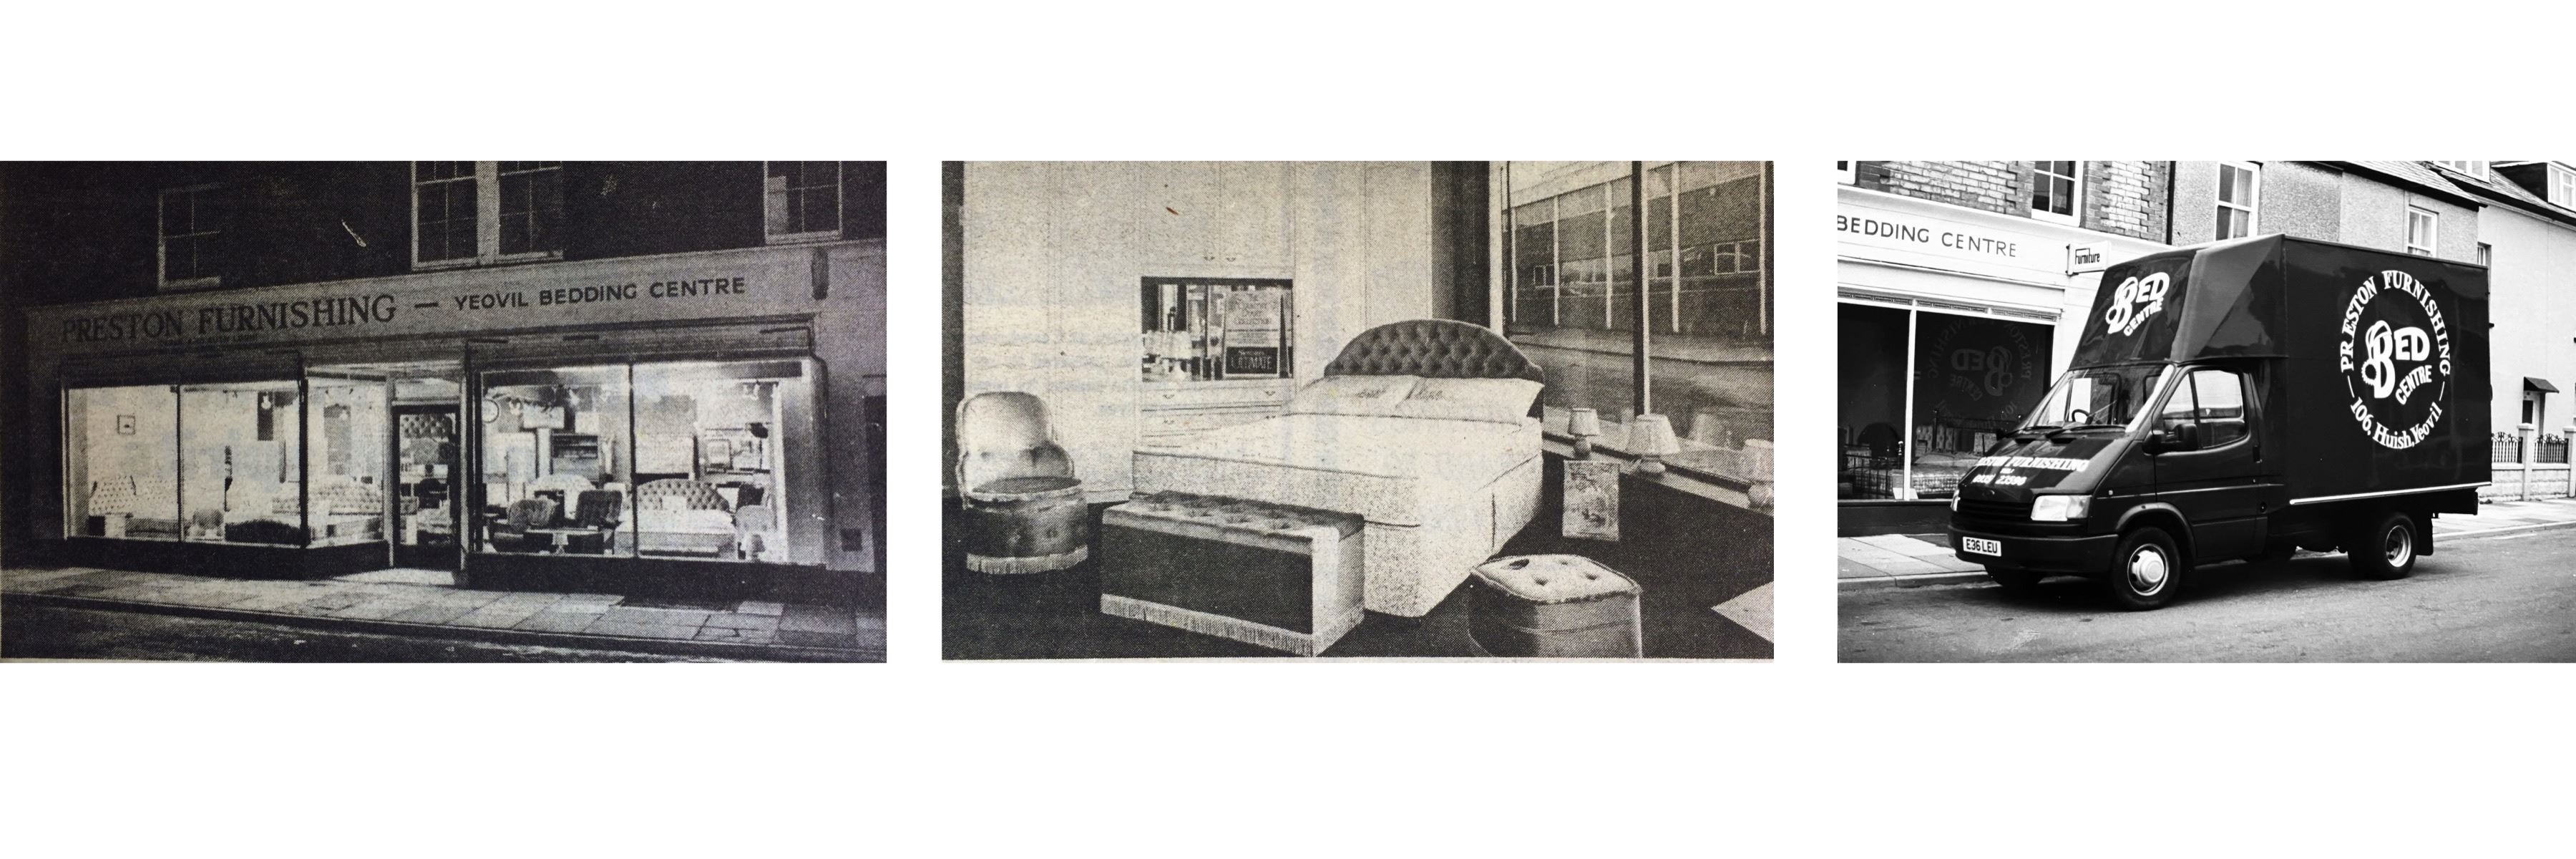 Old images of The Bed Specialist